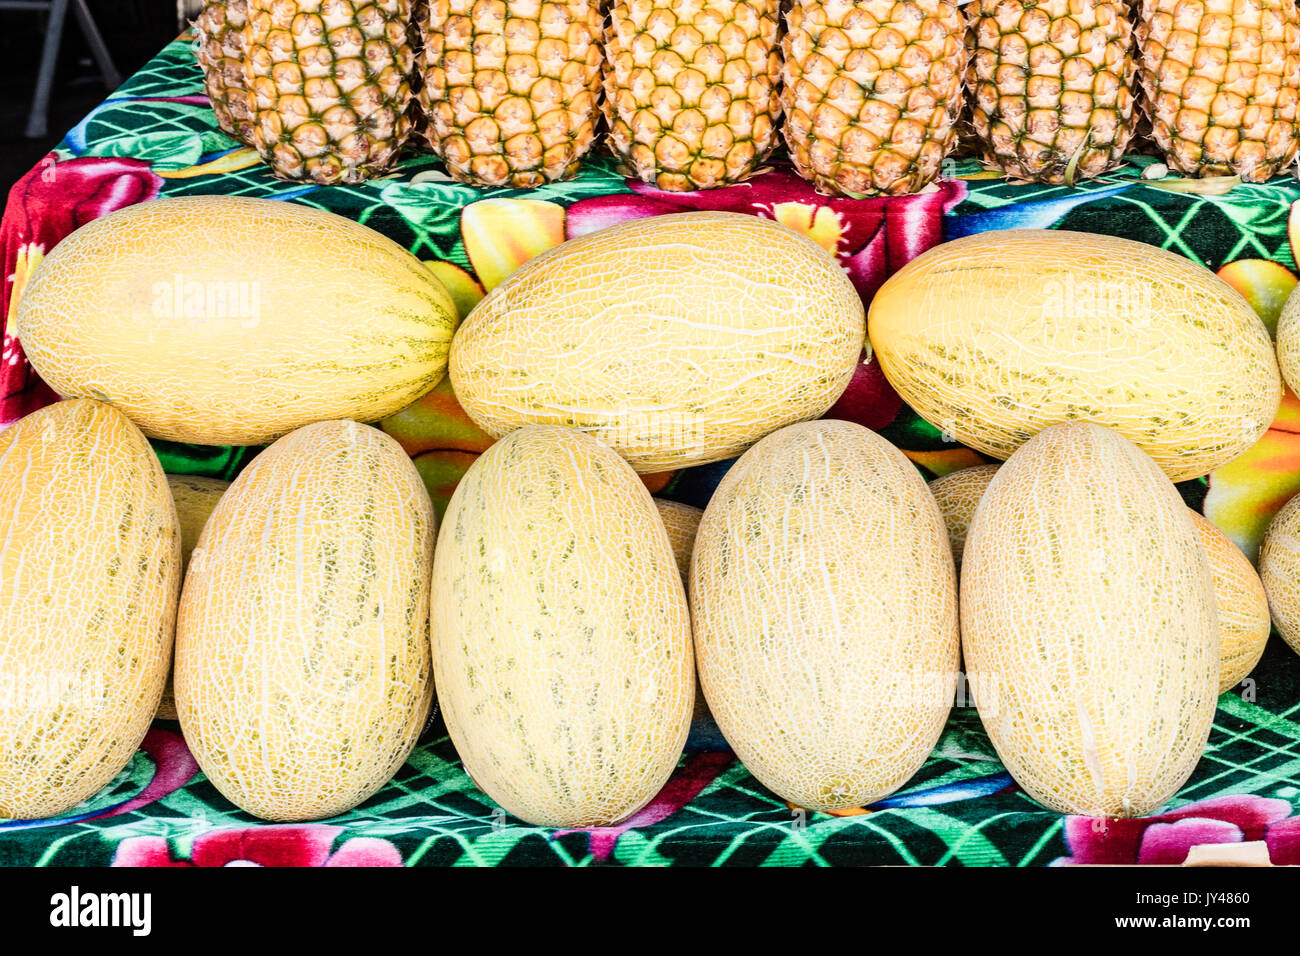 A horizontal photo of yellow melons and pineapples at a farmers market display. Stock Photo